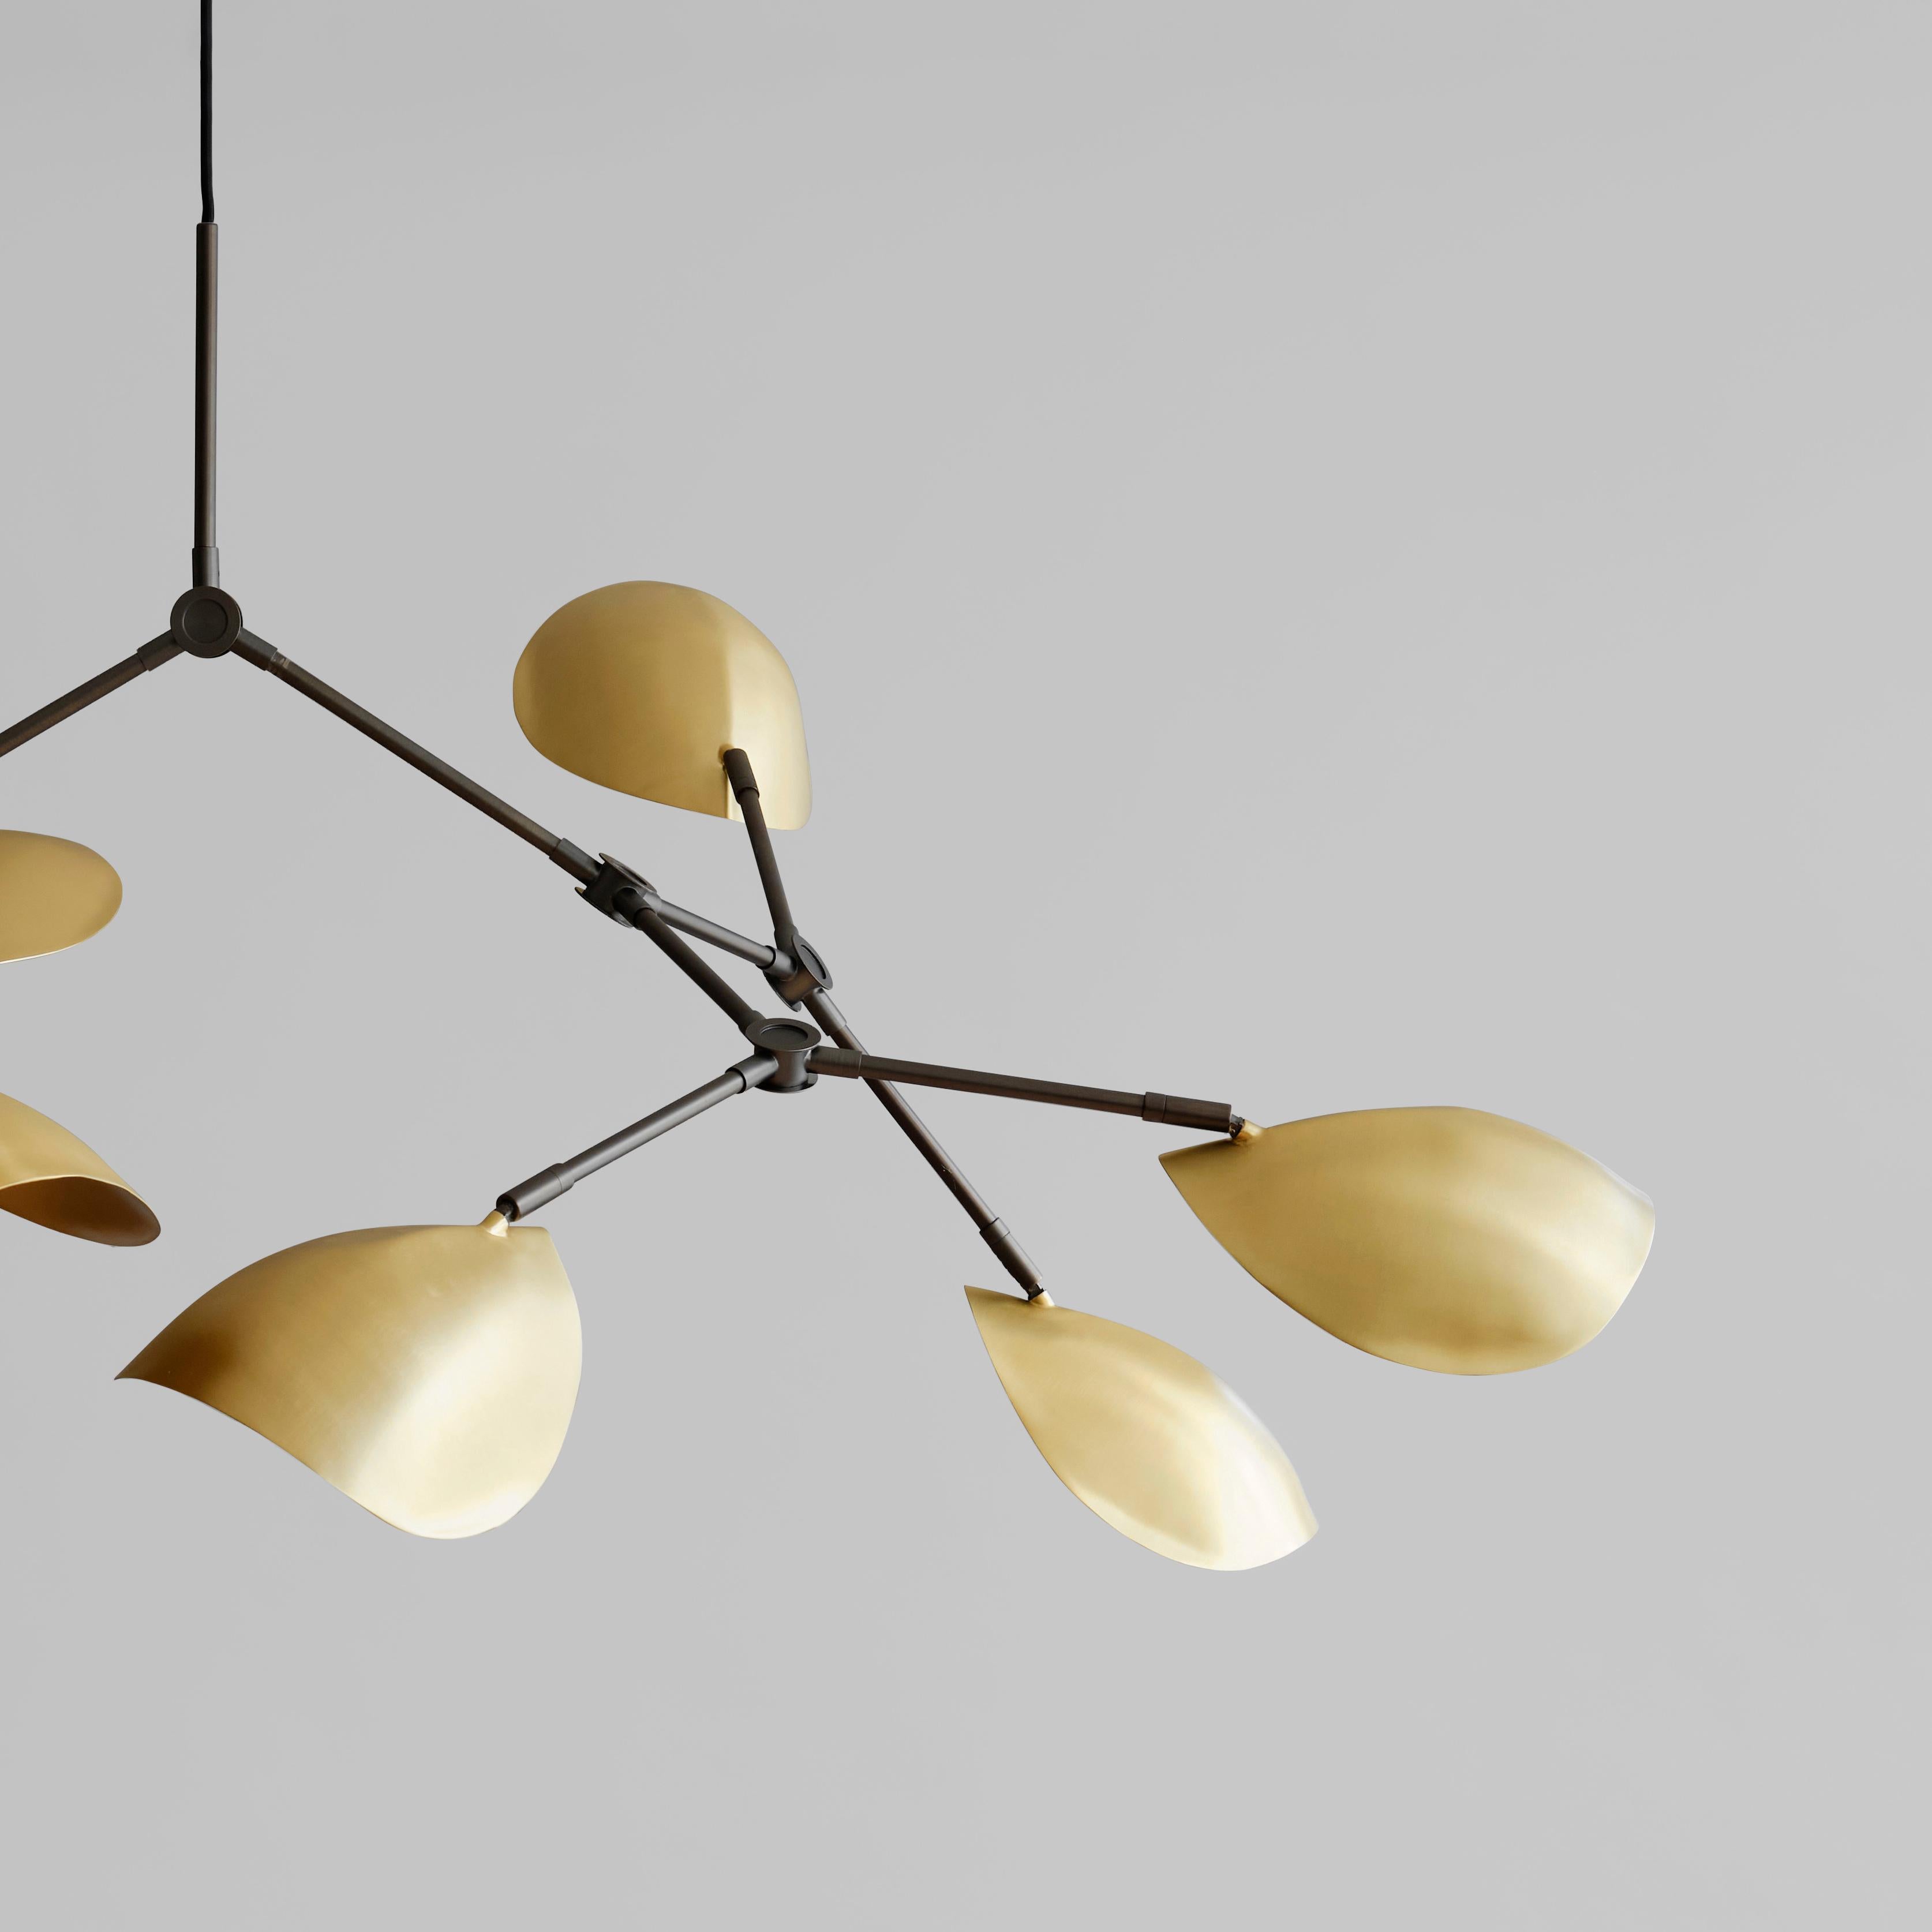 Stingray chandelier brass by 101 Copenhagen
Designed by Kristian Sofus Hansen & Tommy Hyldahl.
Dimensions: L 200 x W 155 x H 88 cm
Materials: brass
Lampshade & Ceiling cup: 100% Iron, with plated Brass finish
Pipes & attachment parts are made of